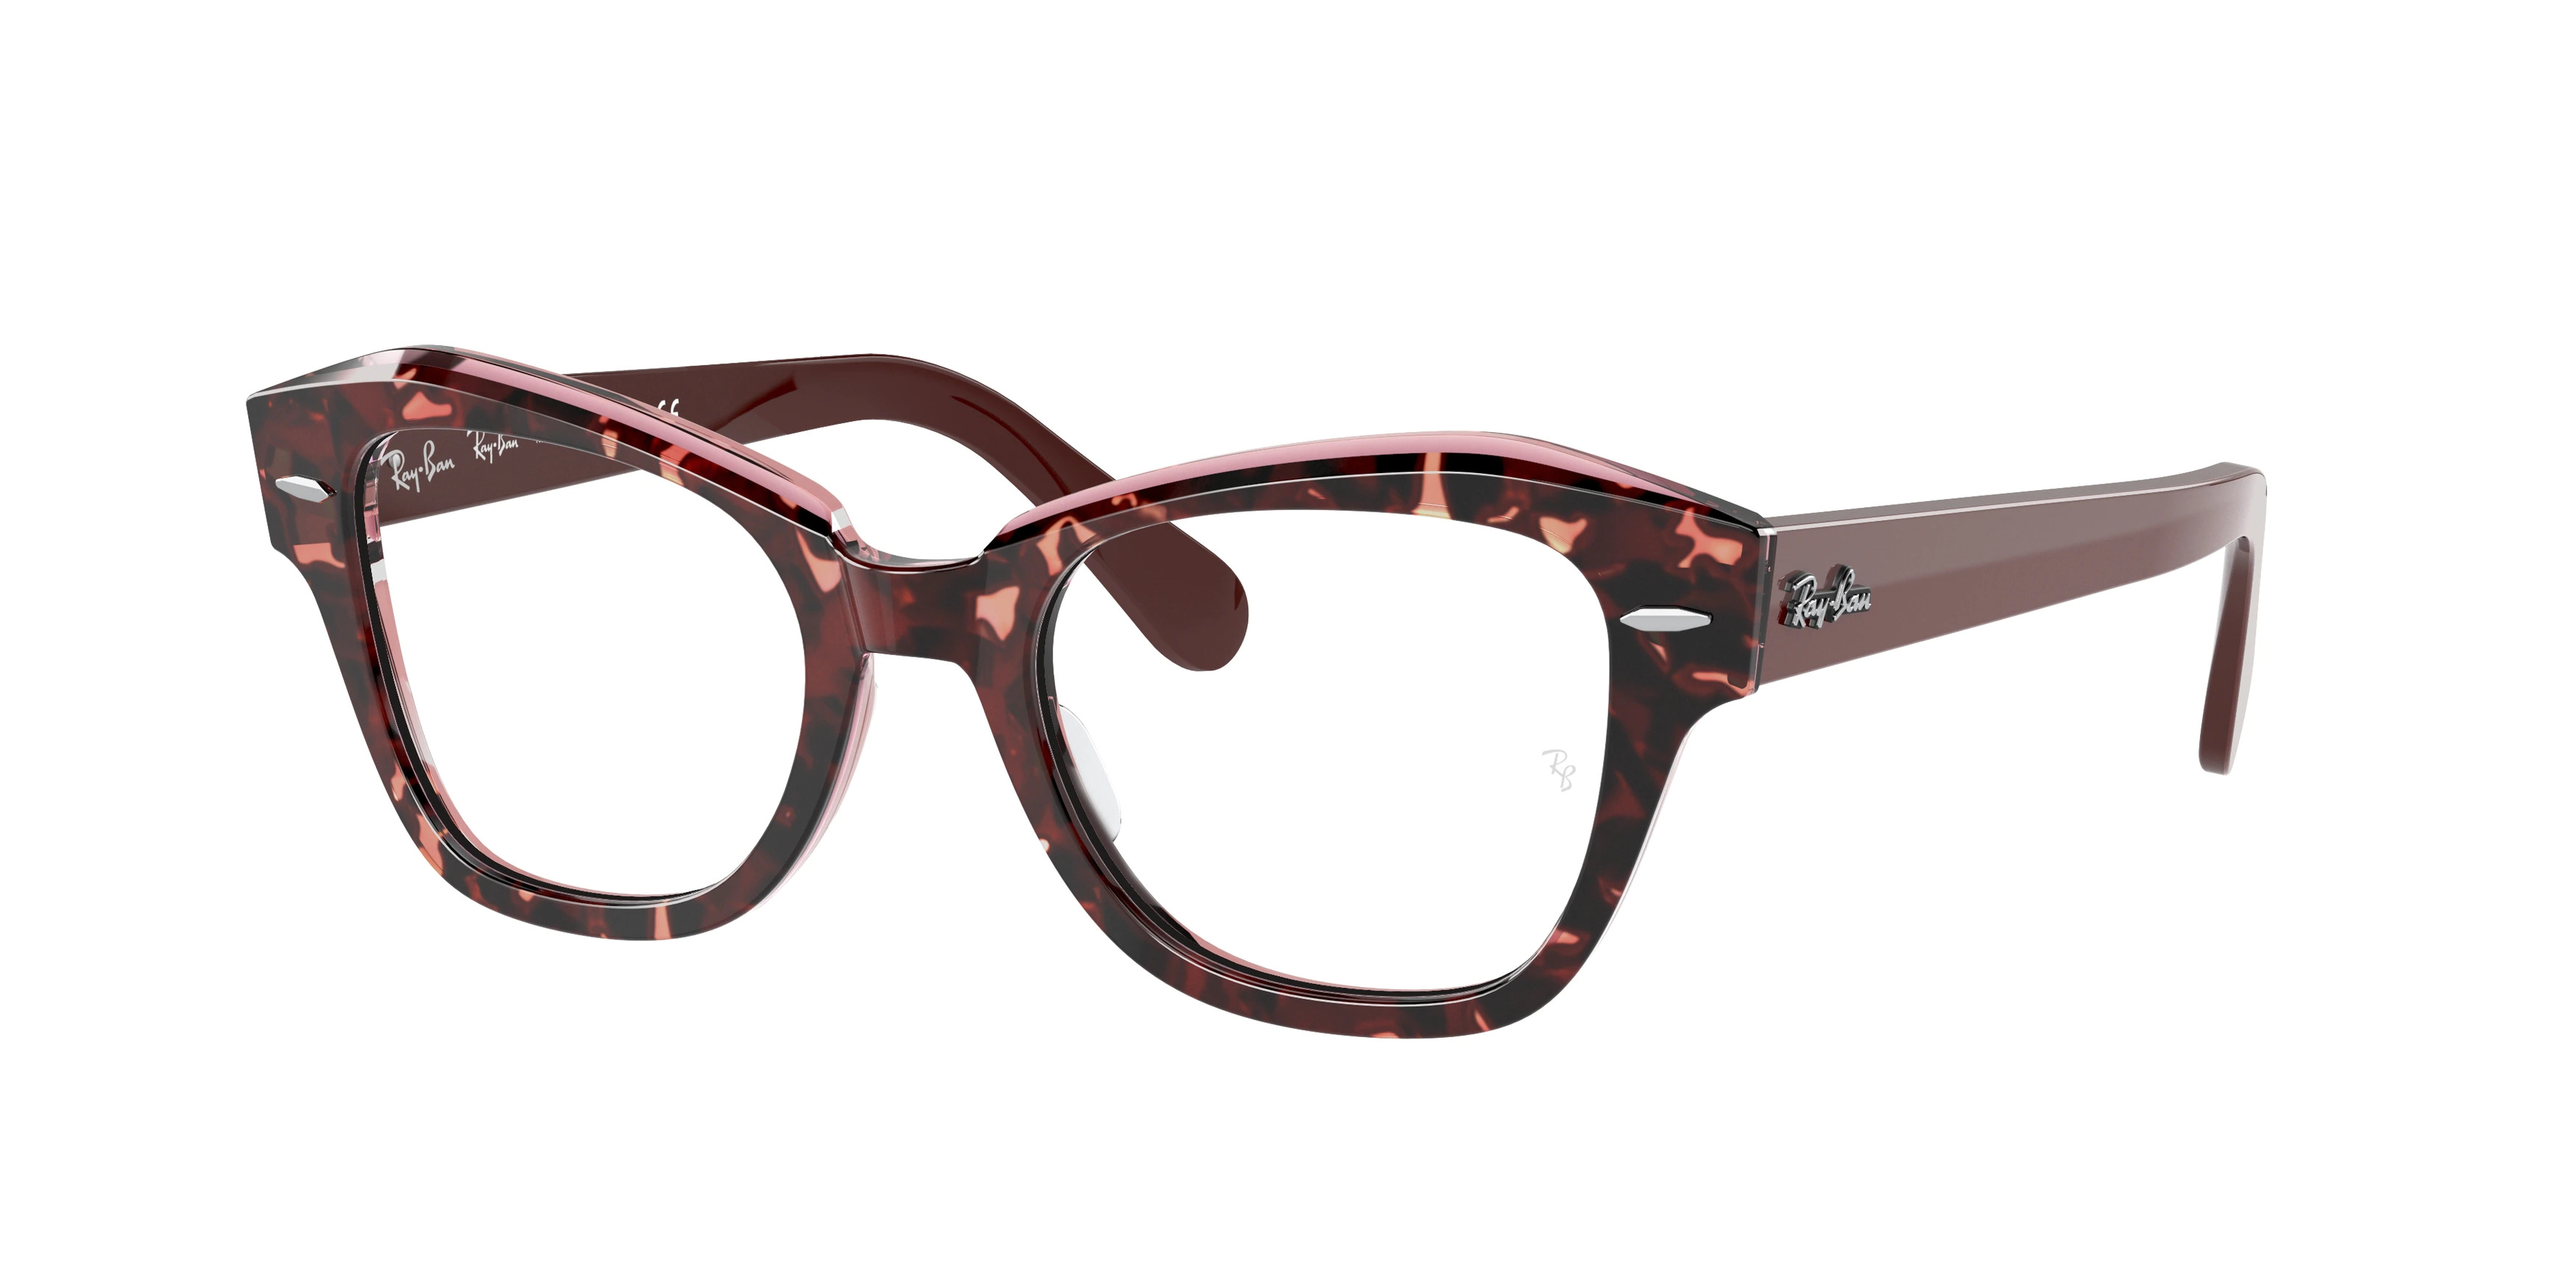 Ray-ban State Street RX5486 8097 Tortoise